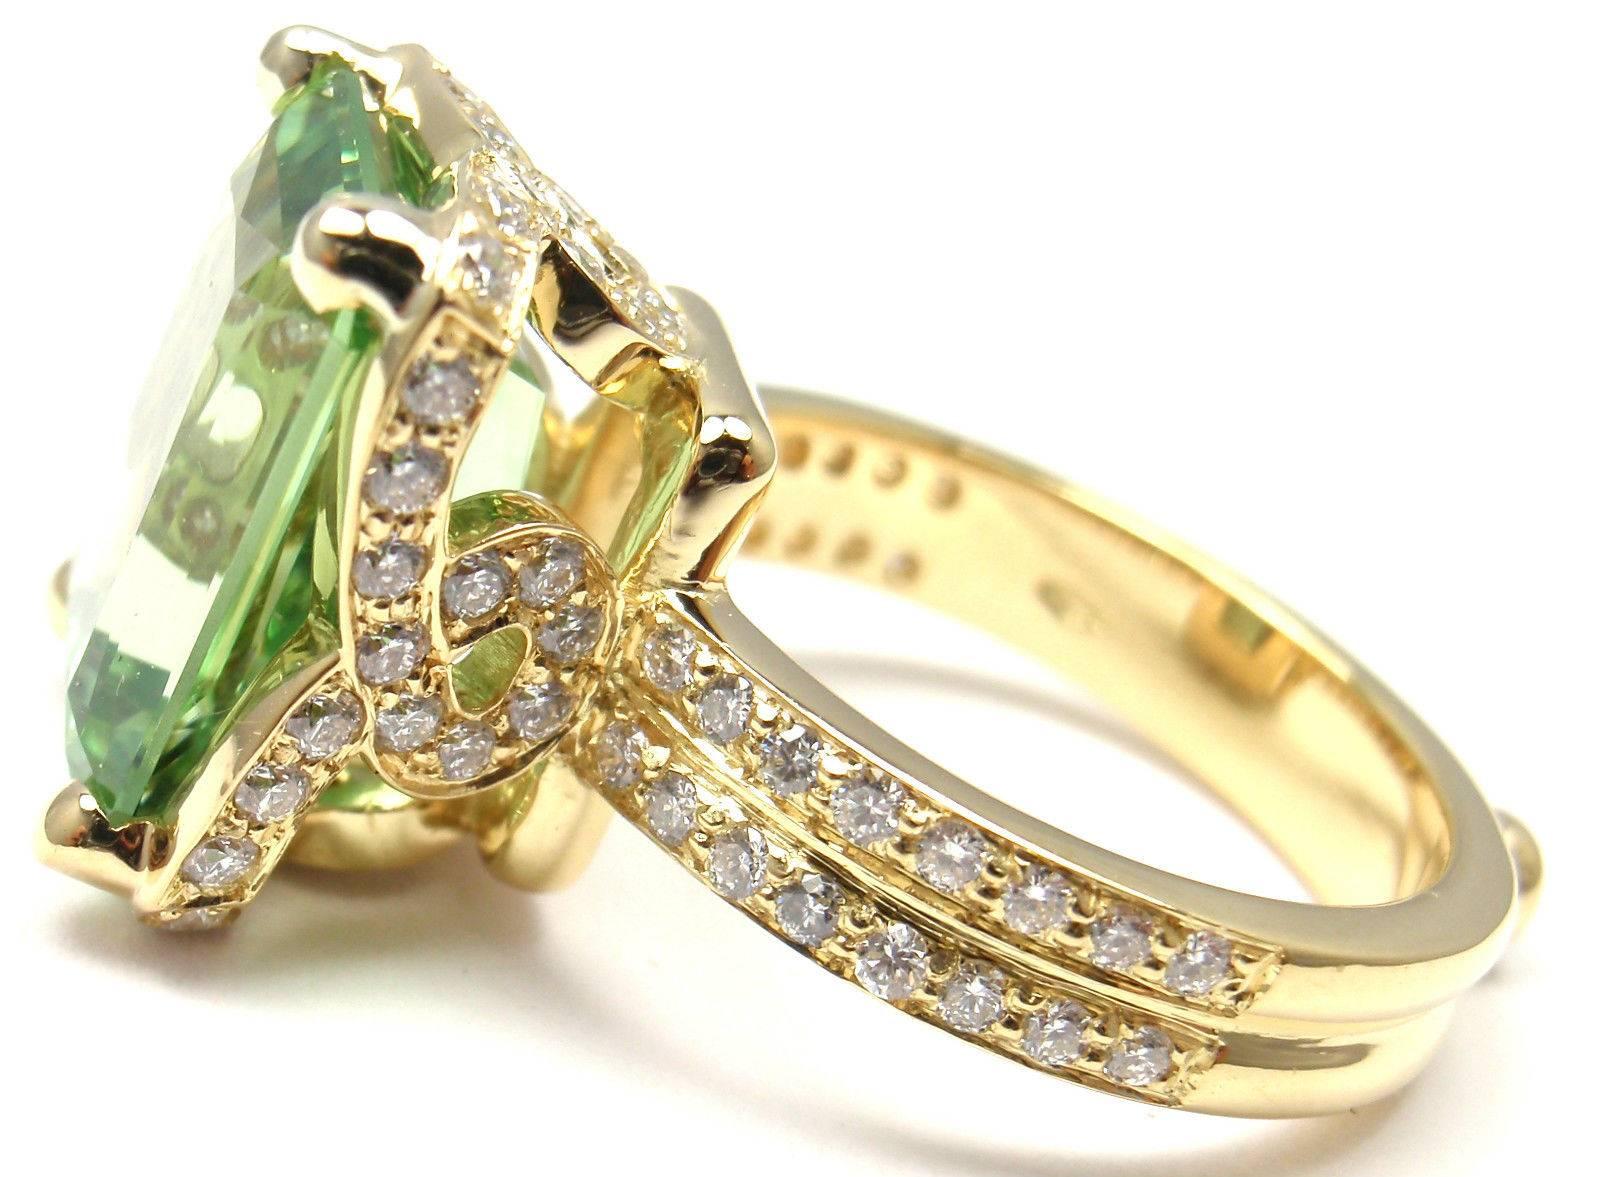 18k Yellow Gold Diamond & Tsavorite Ring by Temple St Clair. 
Total Diamond Weight: .837ct. 
Total Weight Tsavorite: 7.890ct.
This ring comes with AGL certificate and Temple St Clair pouch.

Details:
Ring Size: 6
Width: 15mm
Weight: 10.4